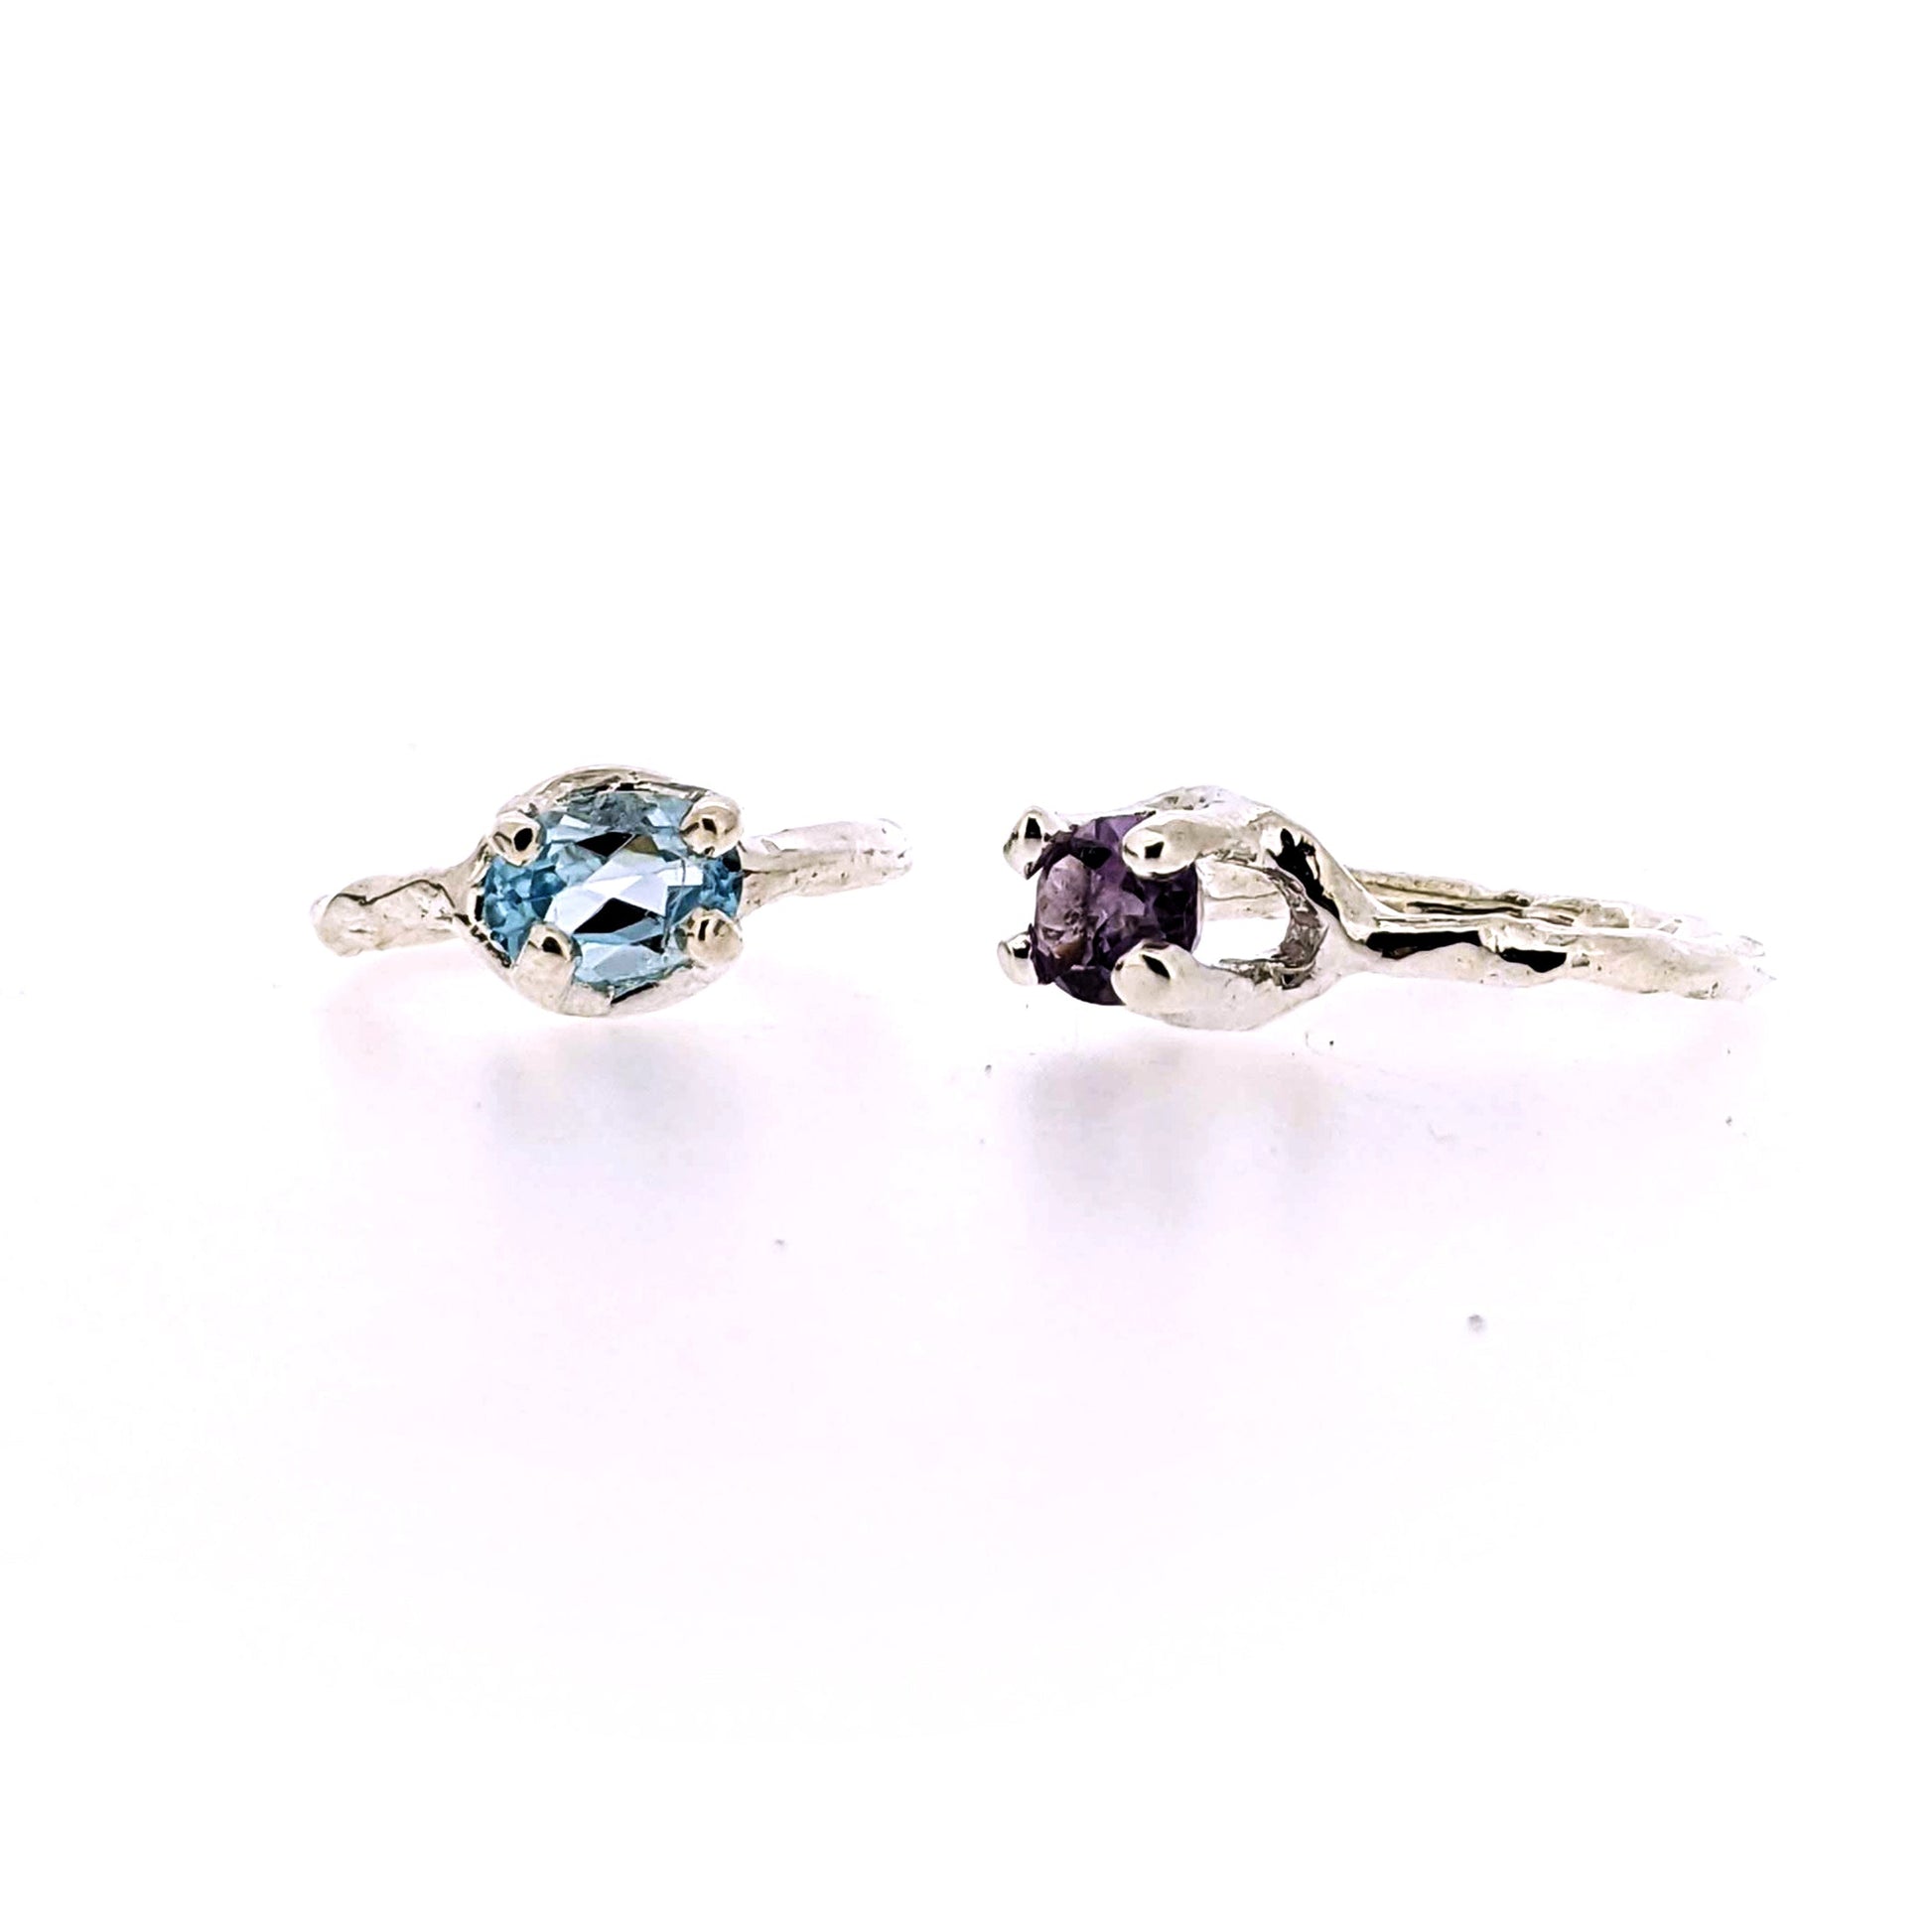 Full frontal and side view of blue topaz and amethyst Ada Rings.